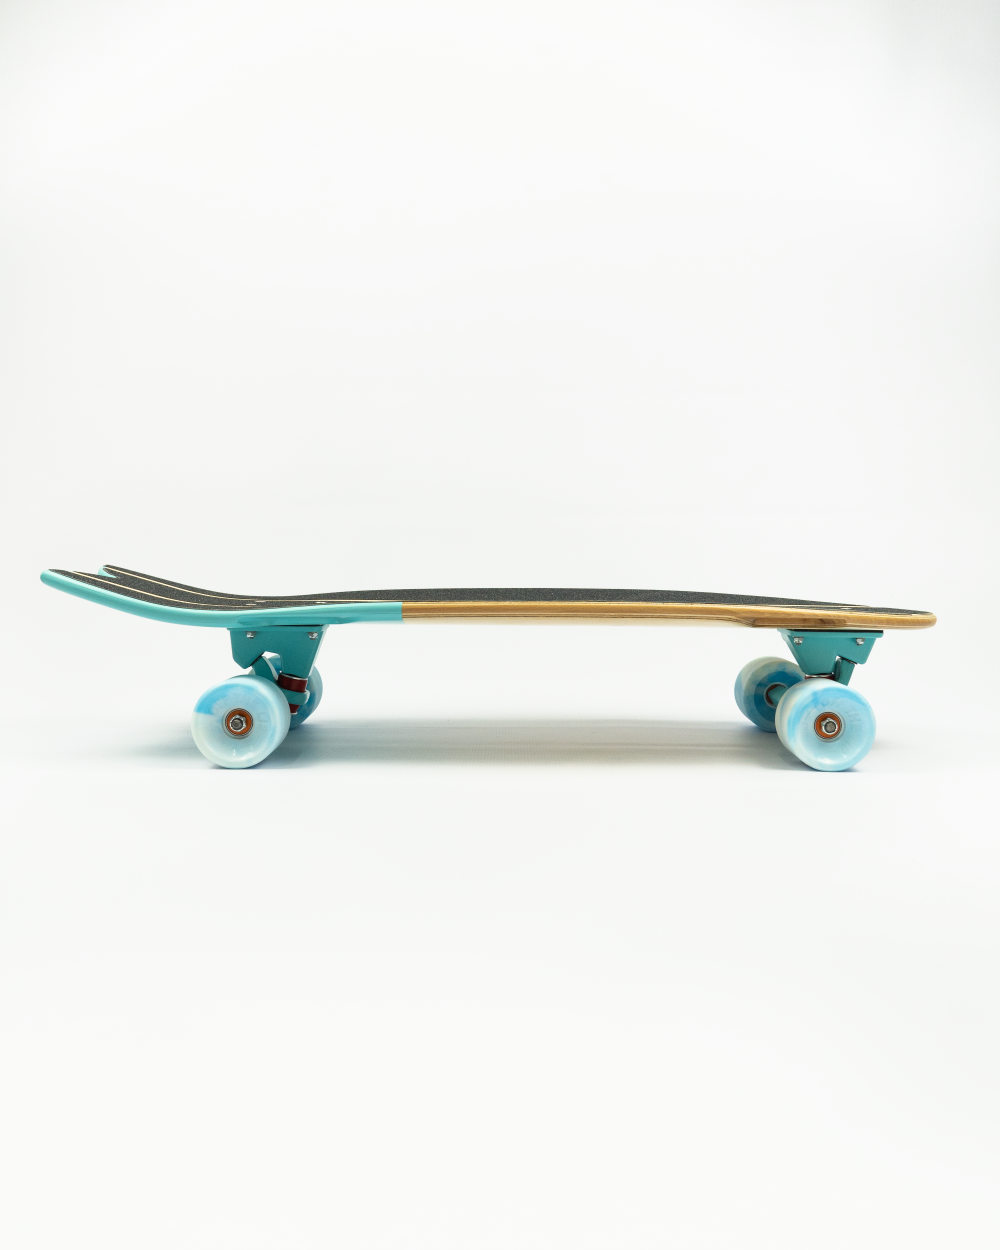 Fish Tail 30" Surfskate - Complete